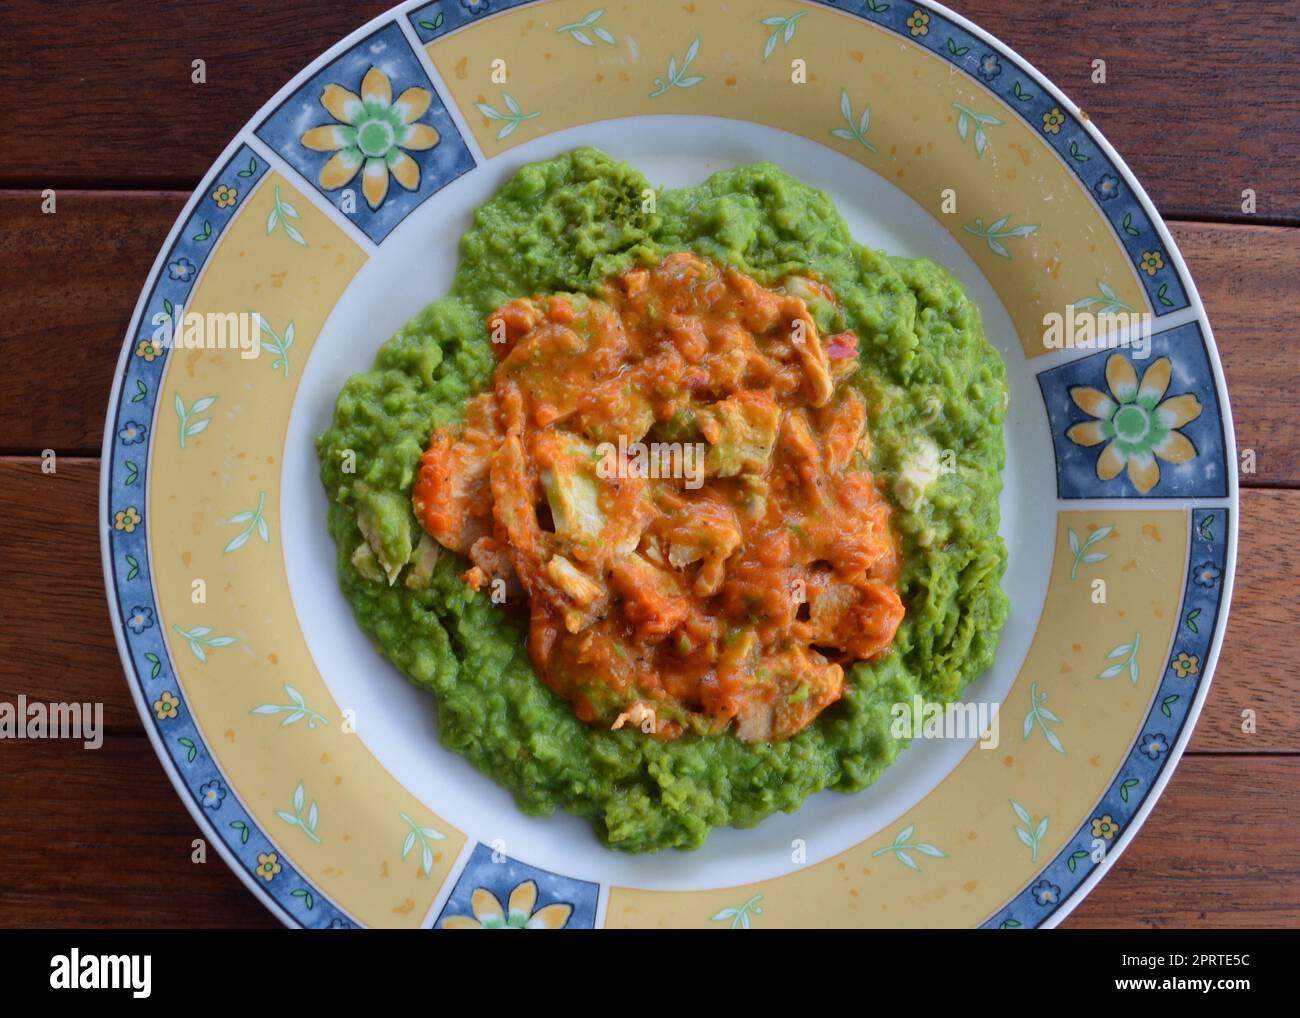 Lemon and pepper chicken with mashed peas Stock Photo